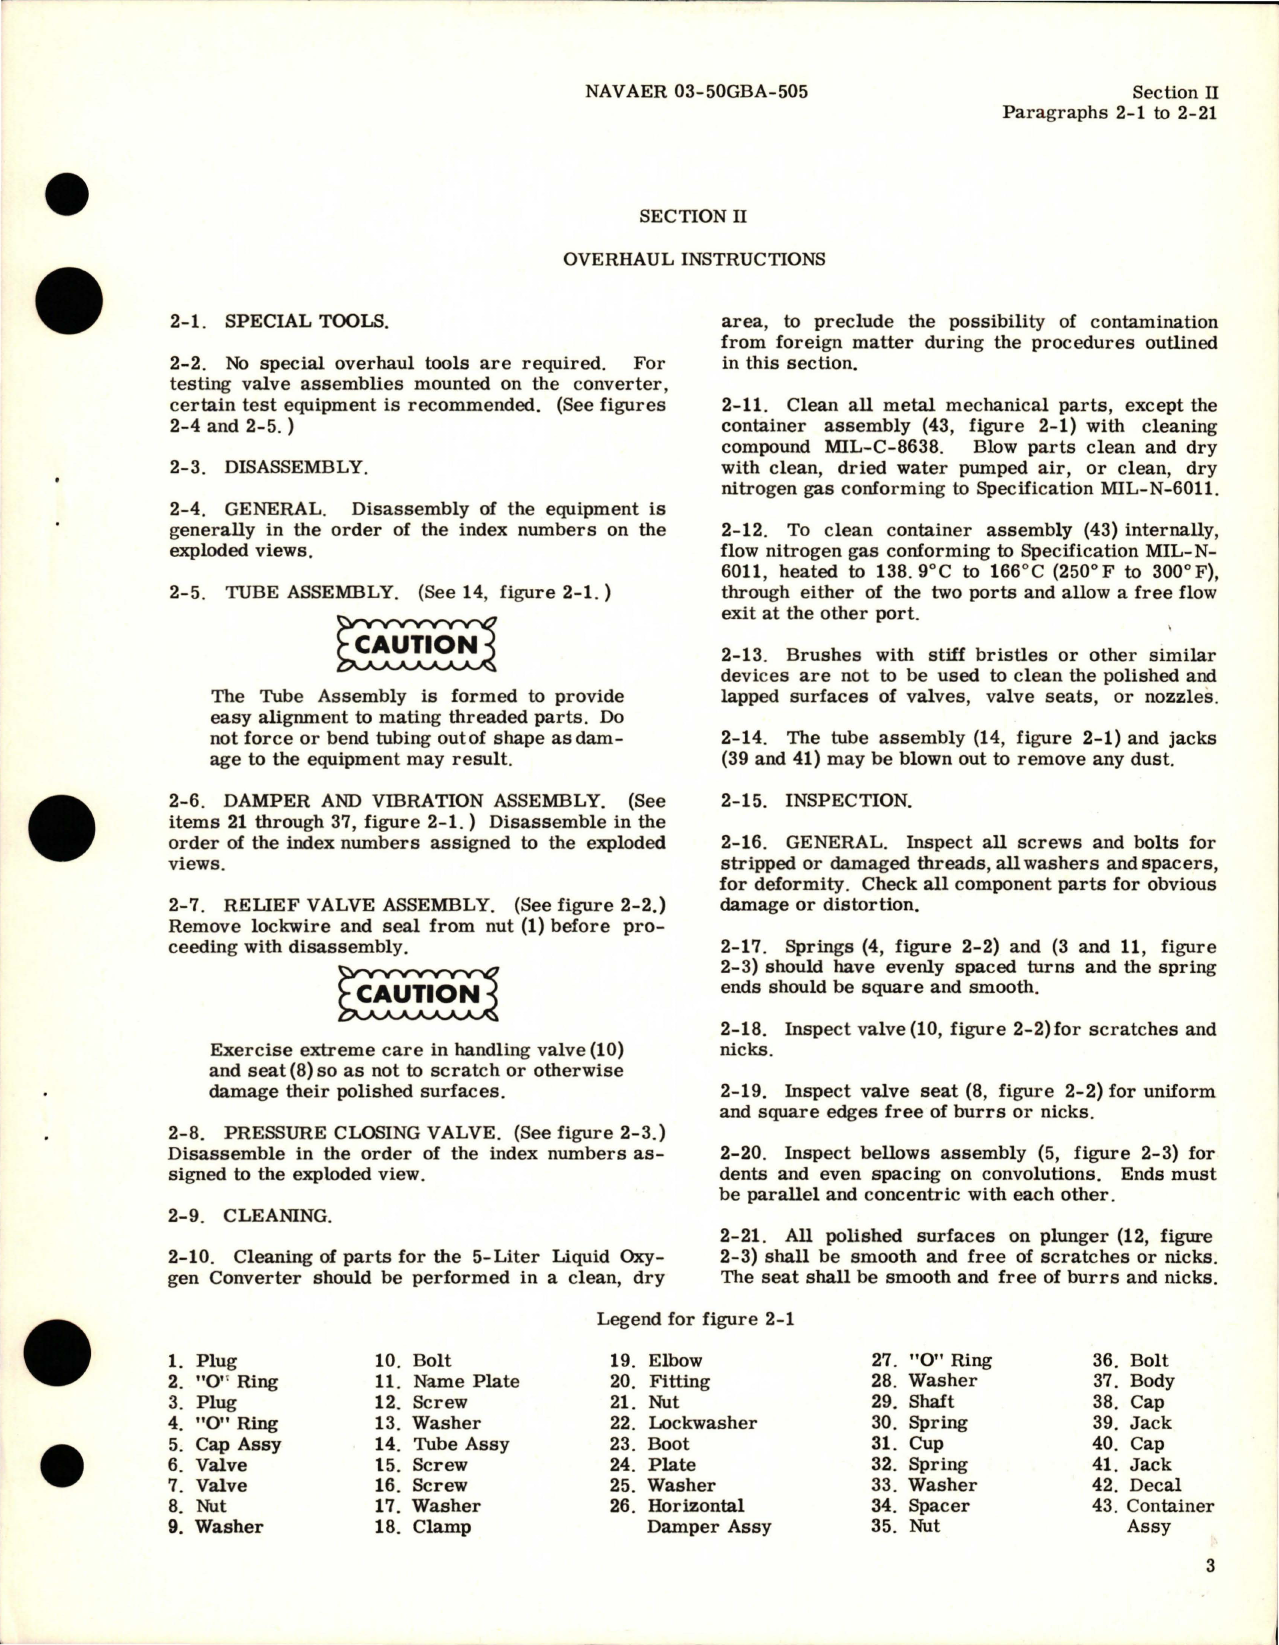 Sample page 5 from AirCorps Library document: Overhaul Instructions with Parts Catalog for De-Icer Air Distributing Valve - Part 1532-2-A